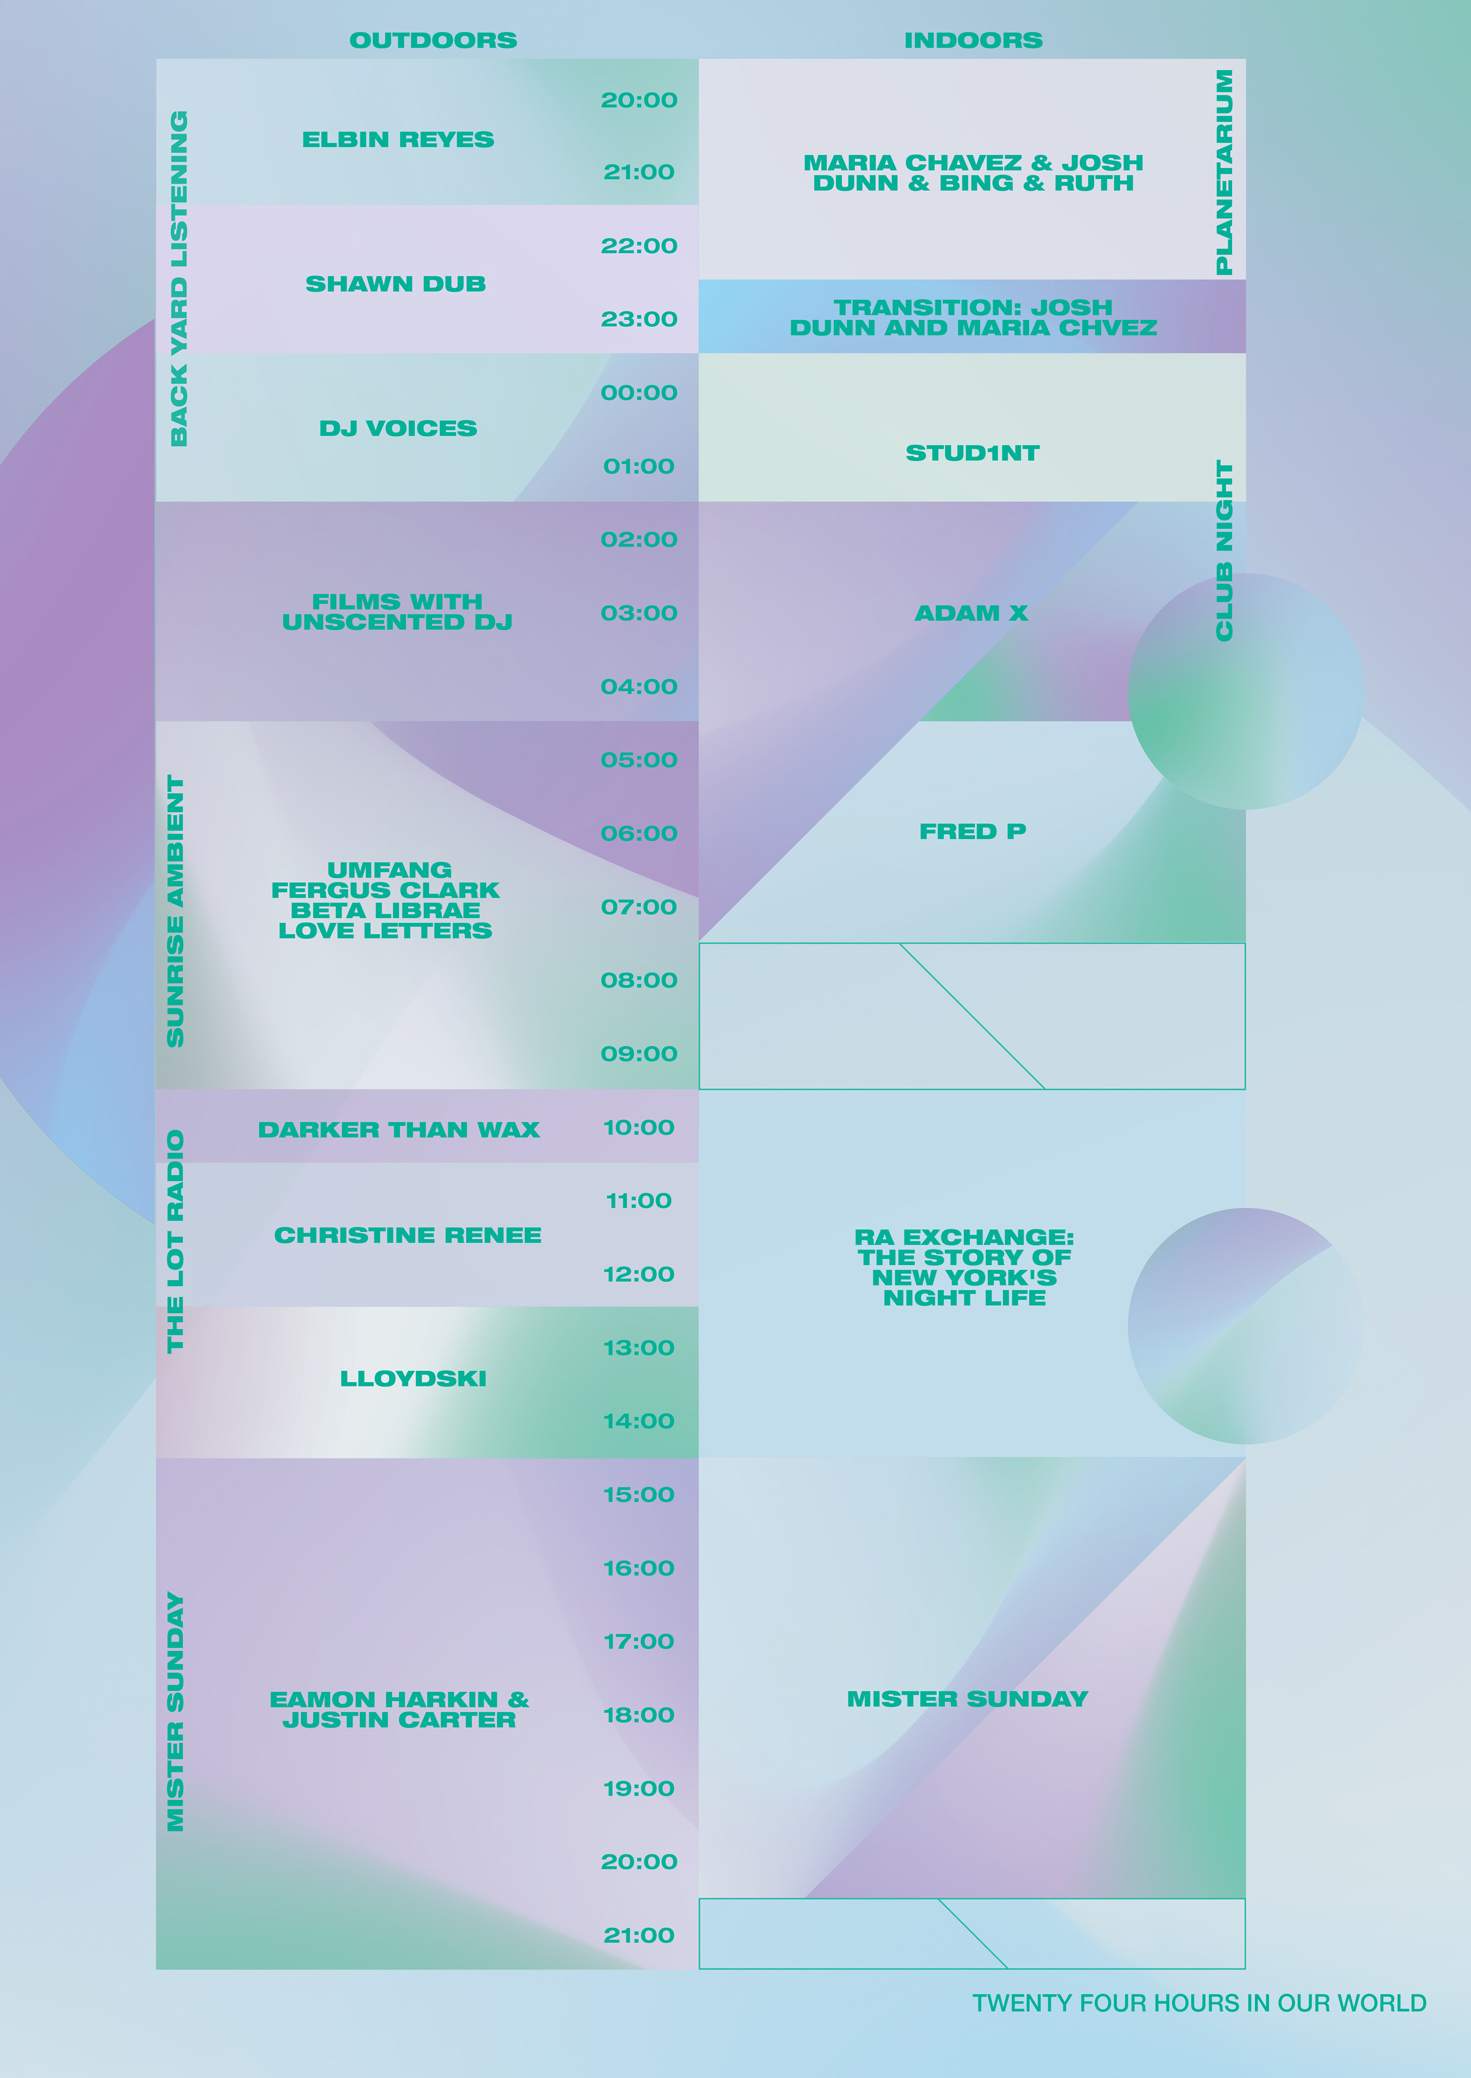 Check out the timetable for RA 24/7 New York image